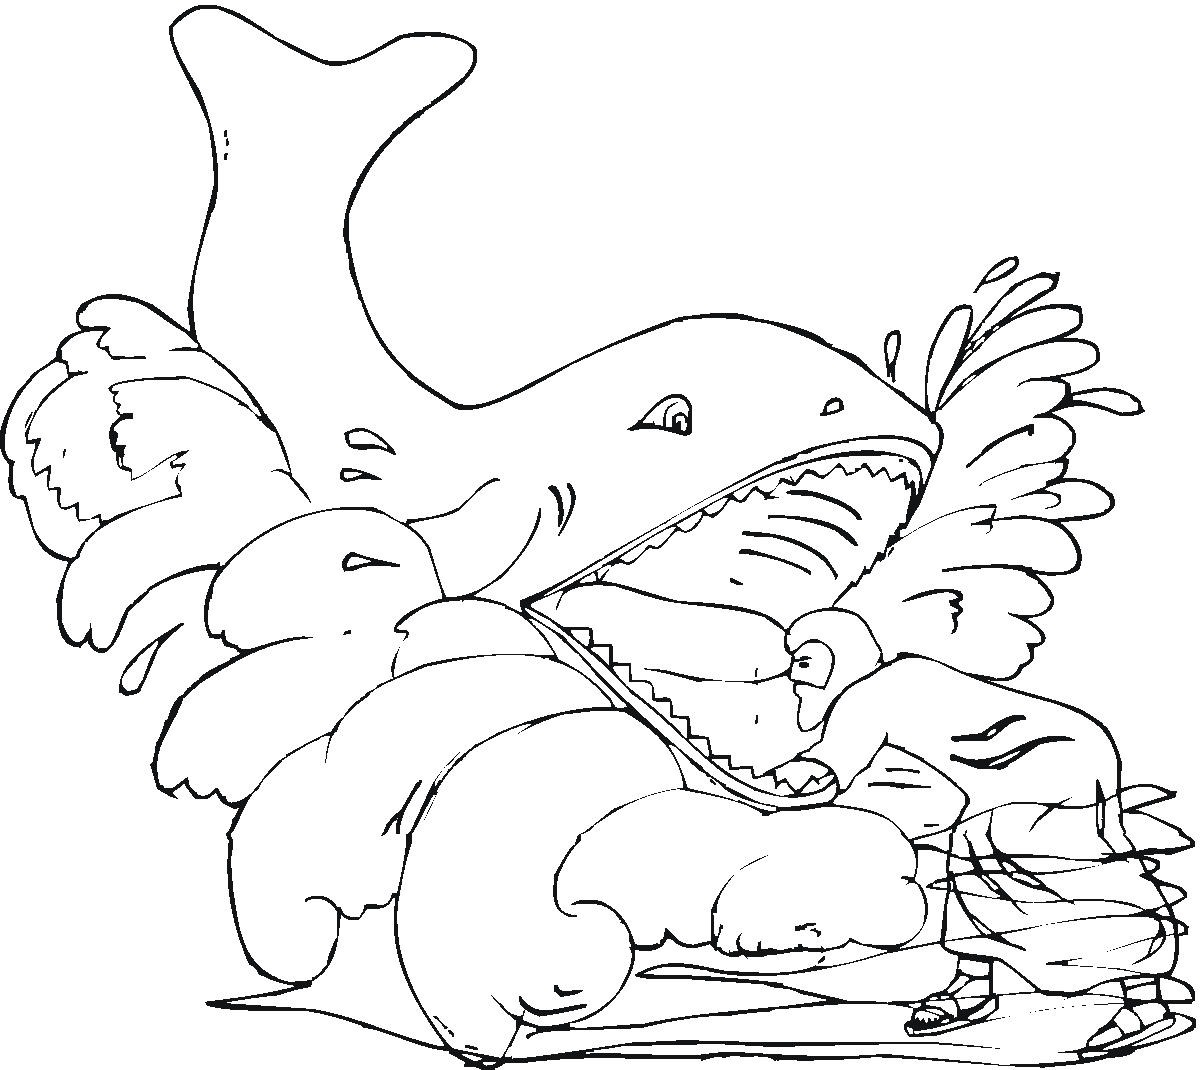 killer whale coloring pages to print